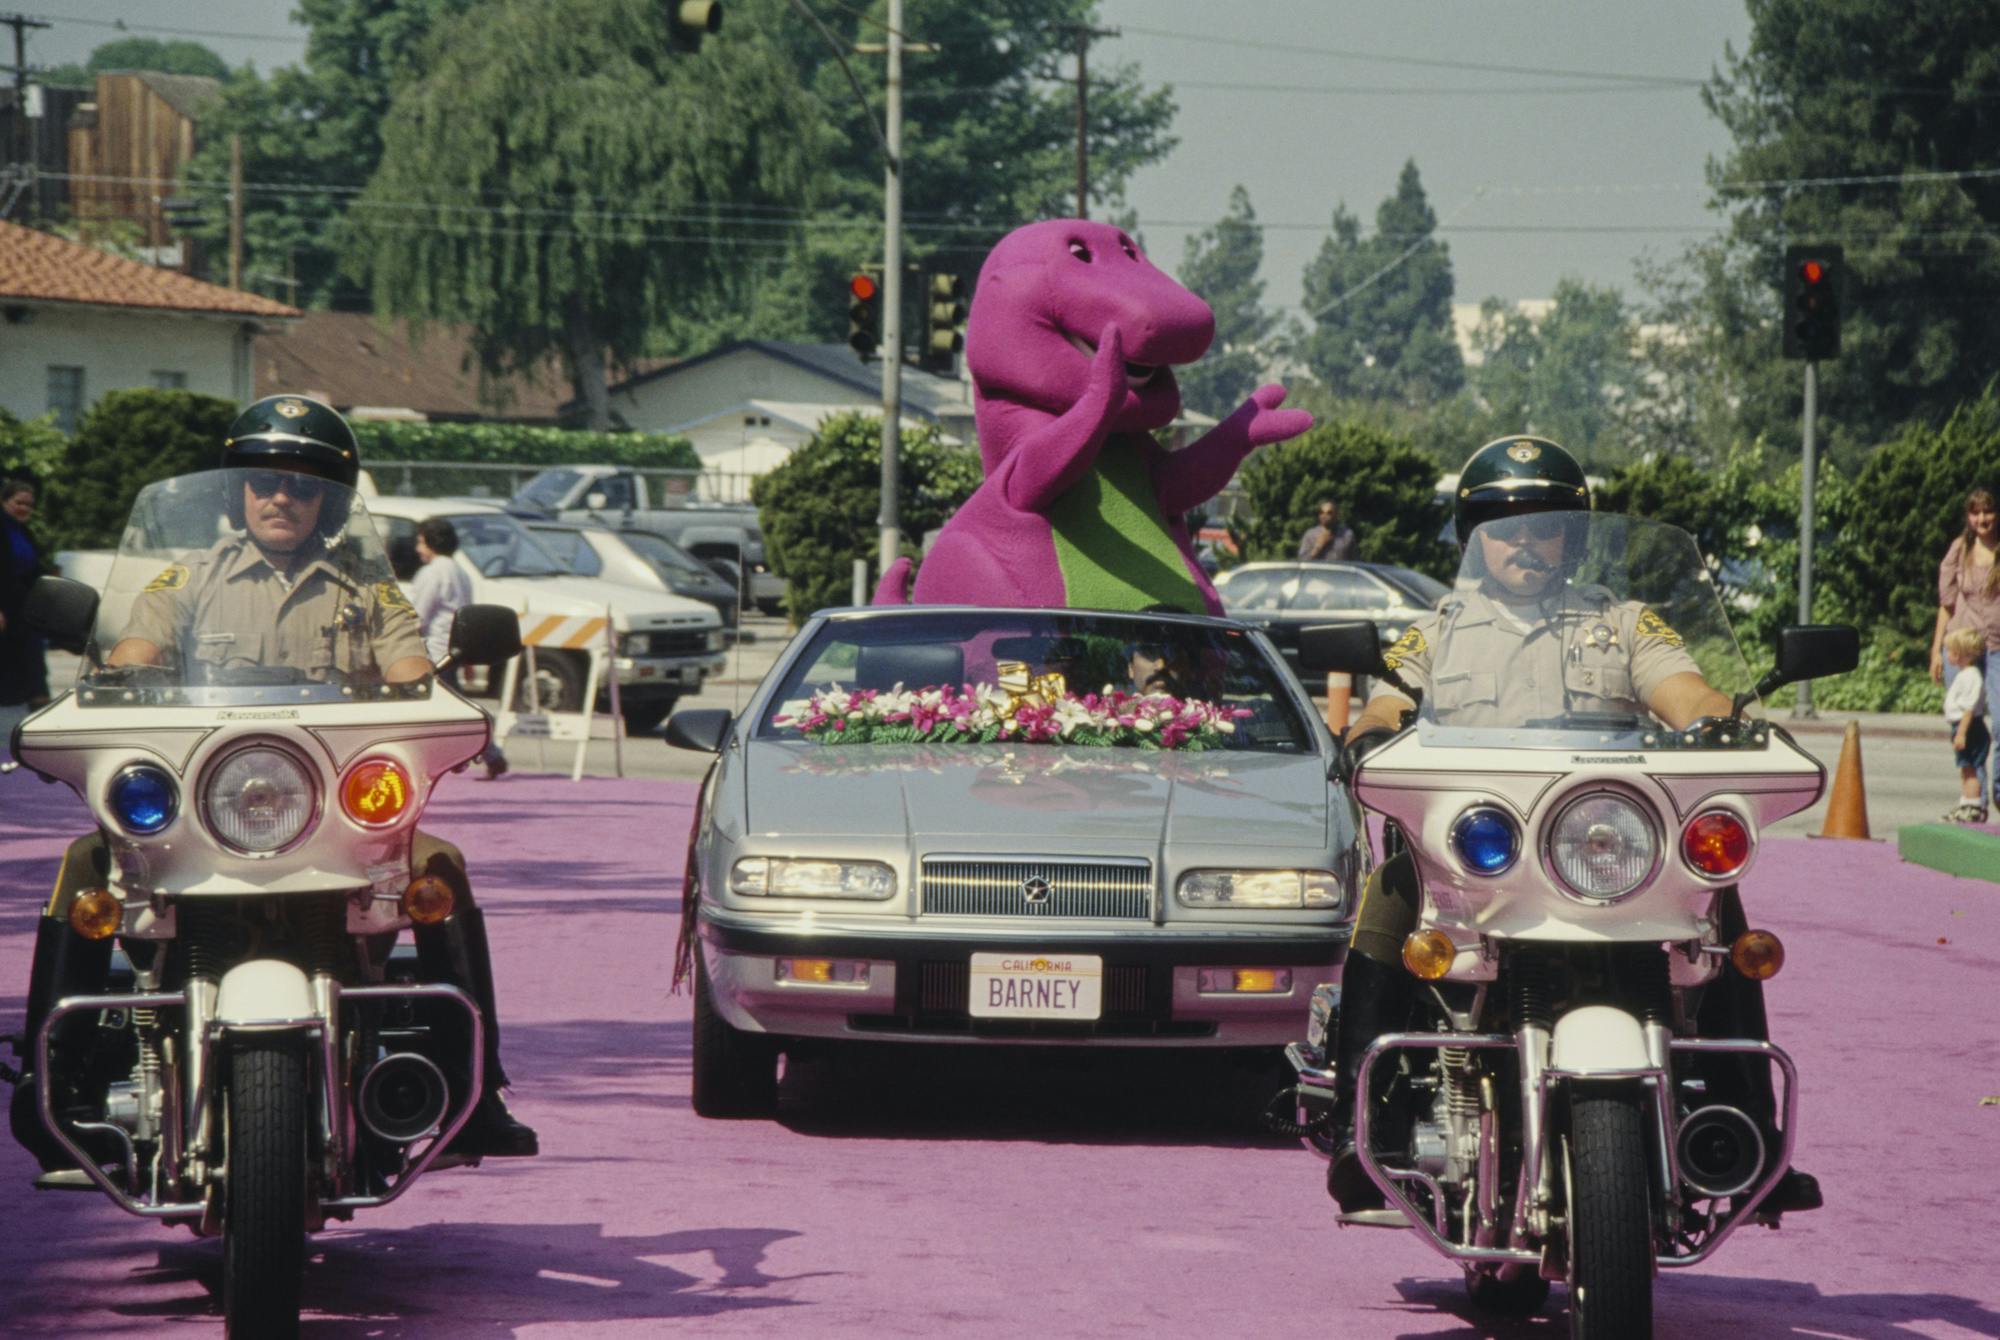 Barney the Dinosaur in a car because he is a boss